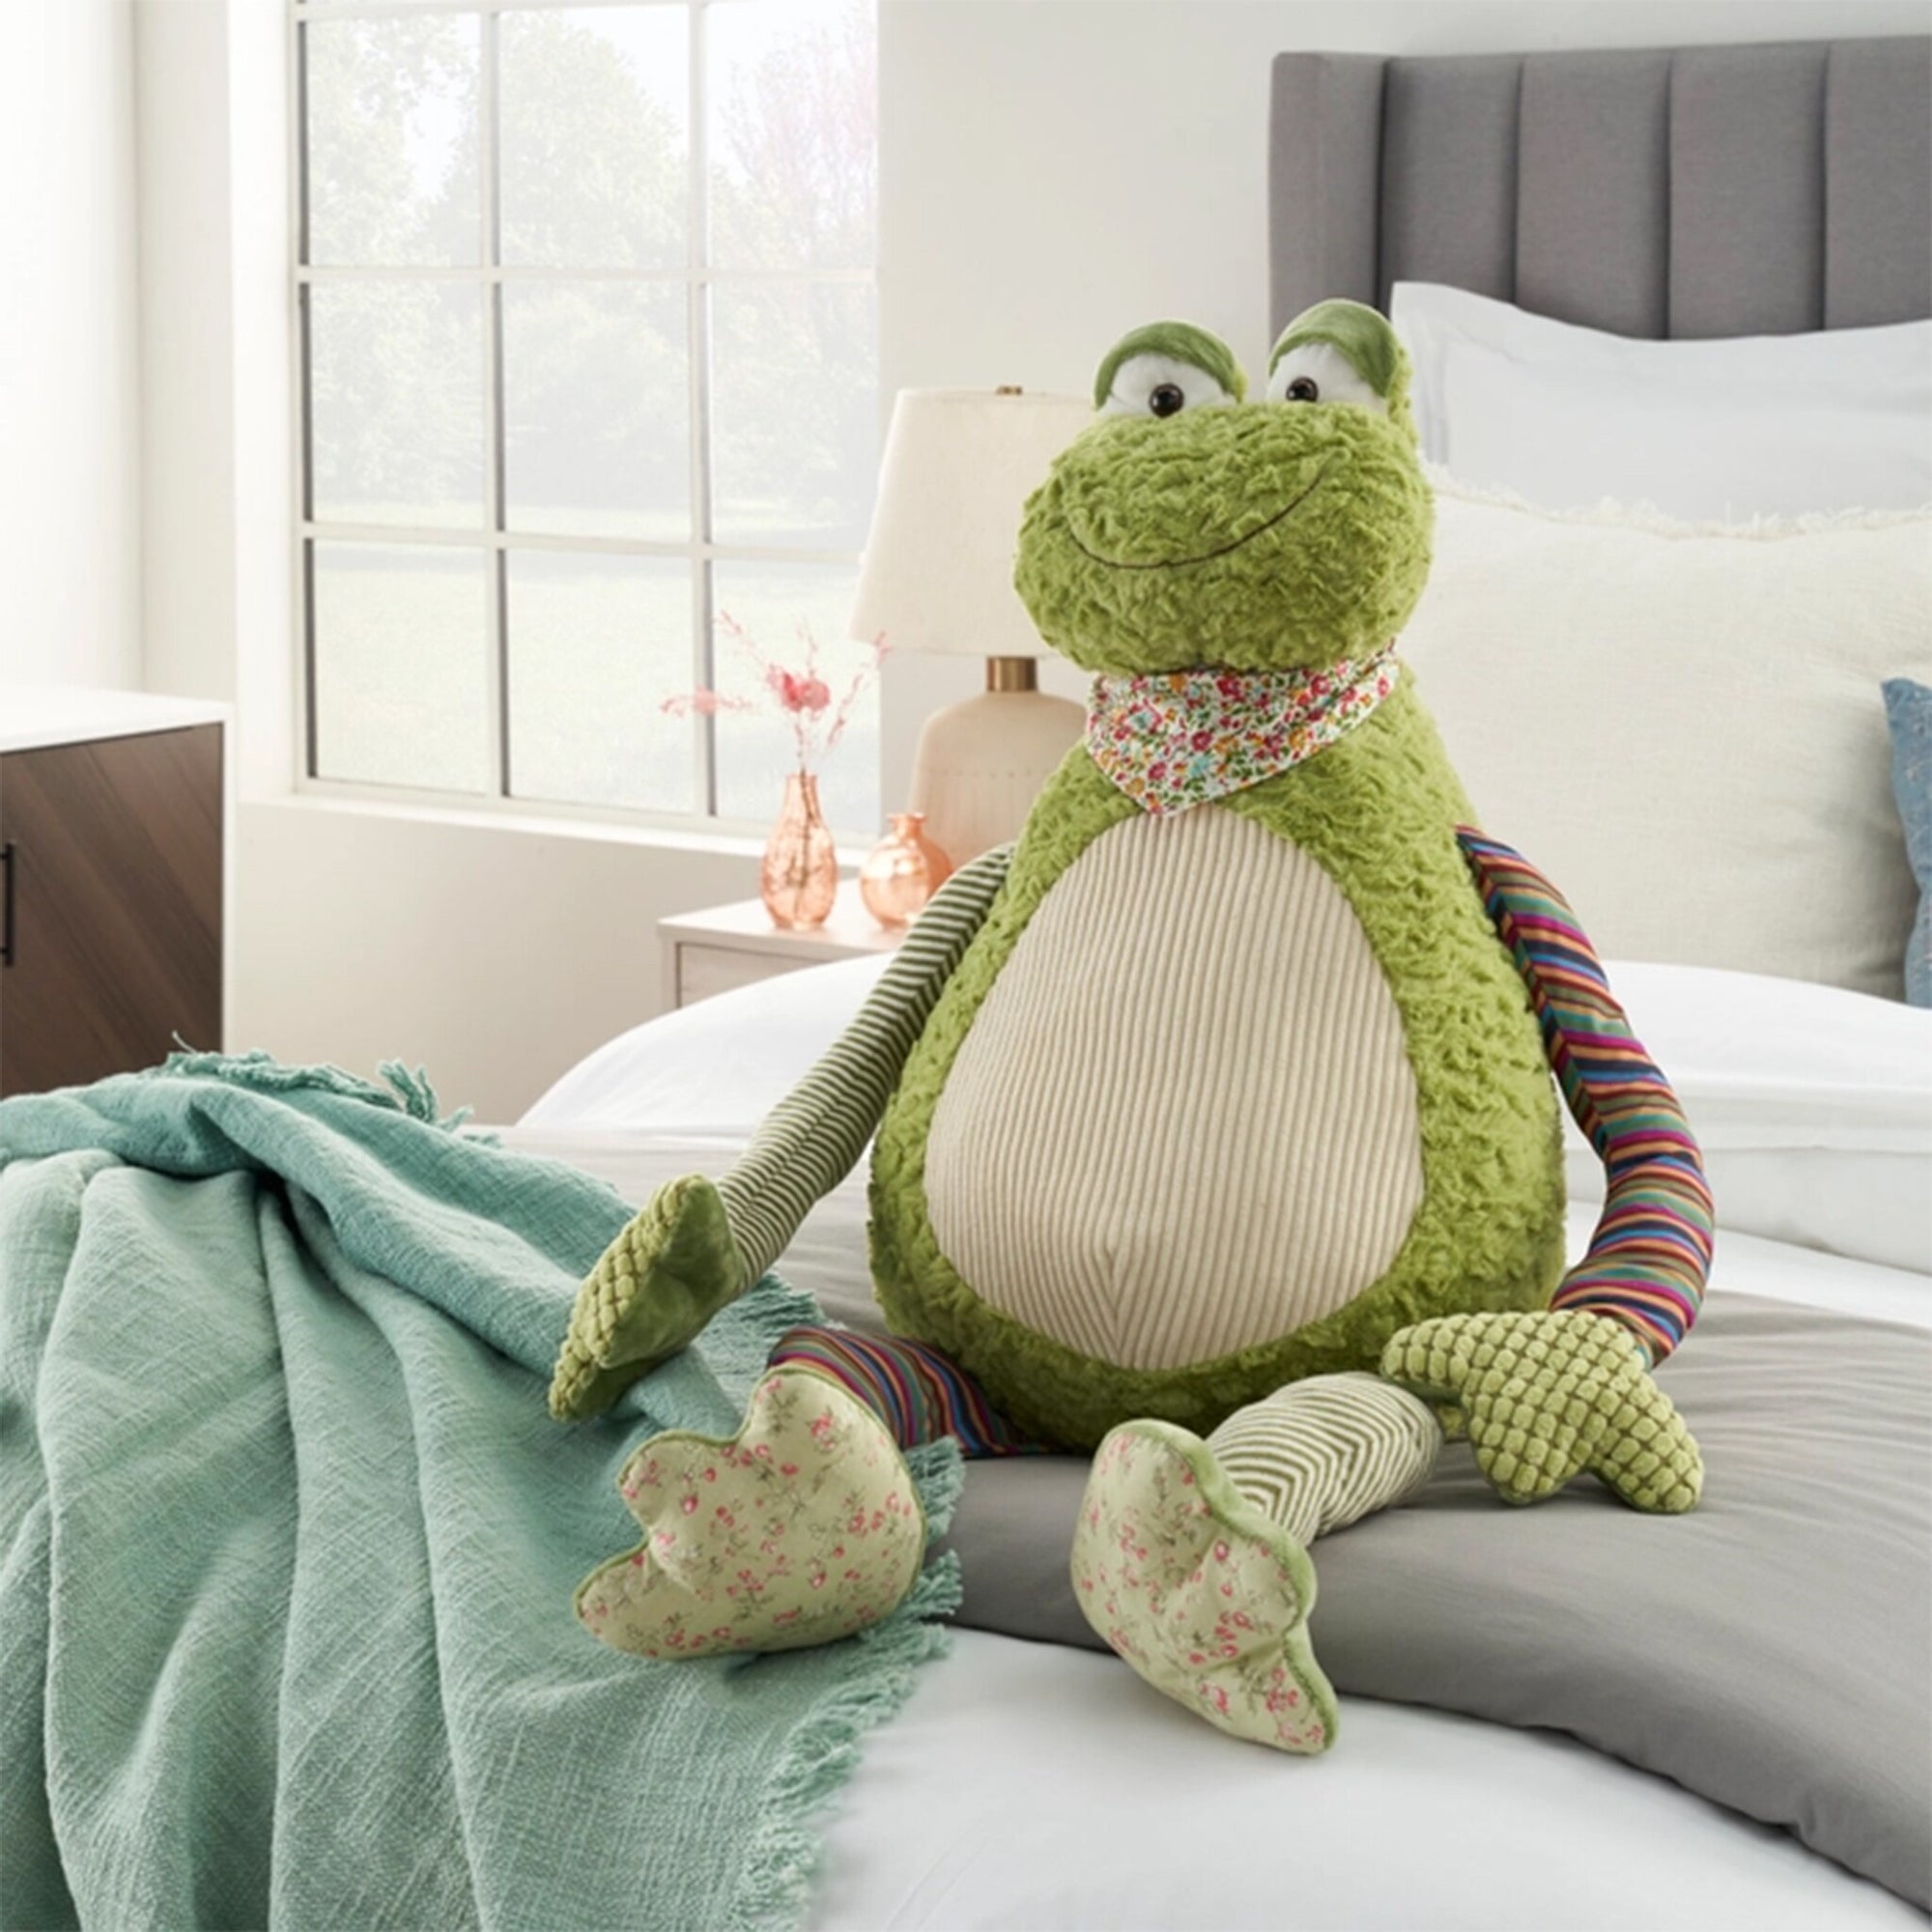 Fred the Green Frog Plush Animal